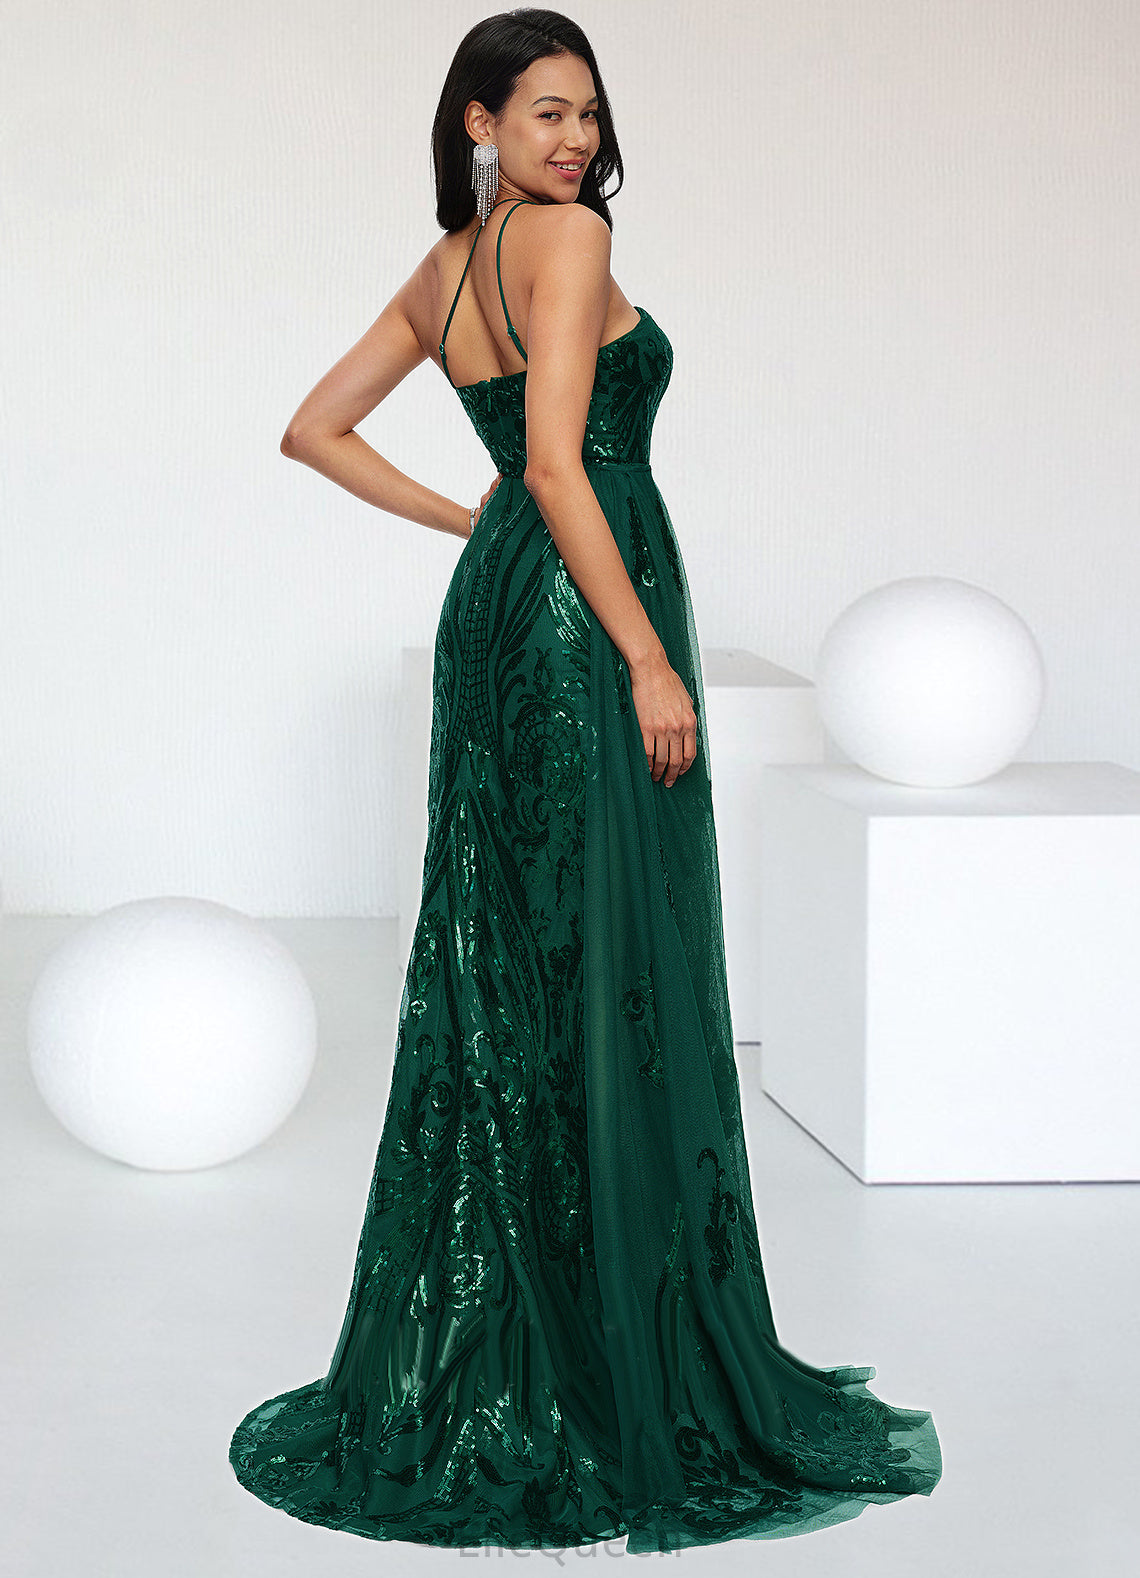 Kiana Trumpet/Mermaid One Shoulder Sweep Train Sequin Prom Dresses With Sequins DGP0022226